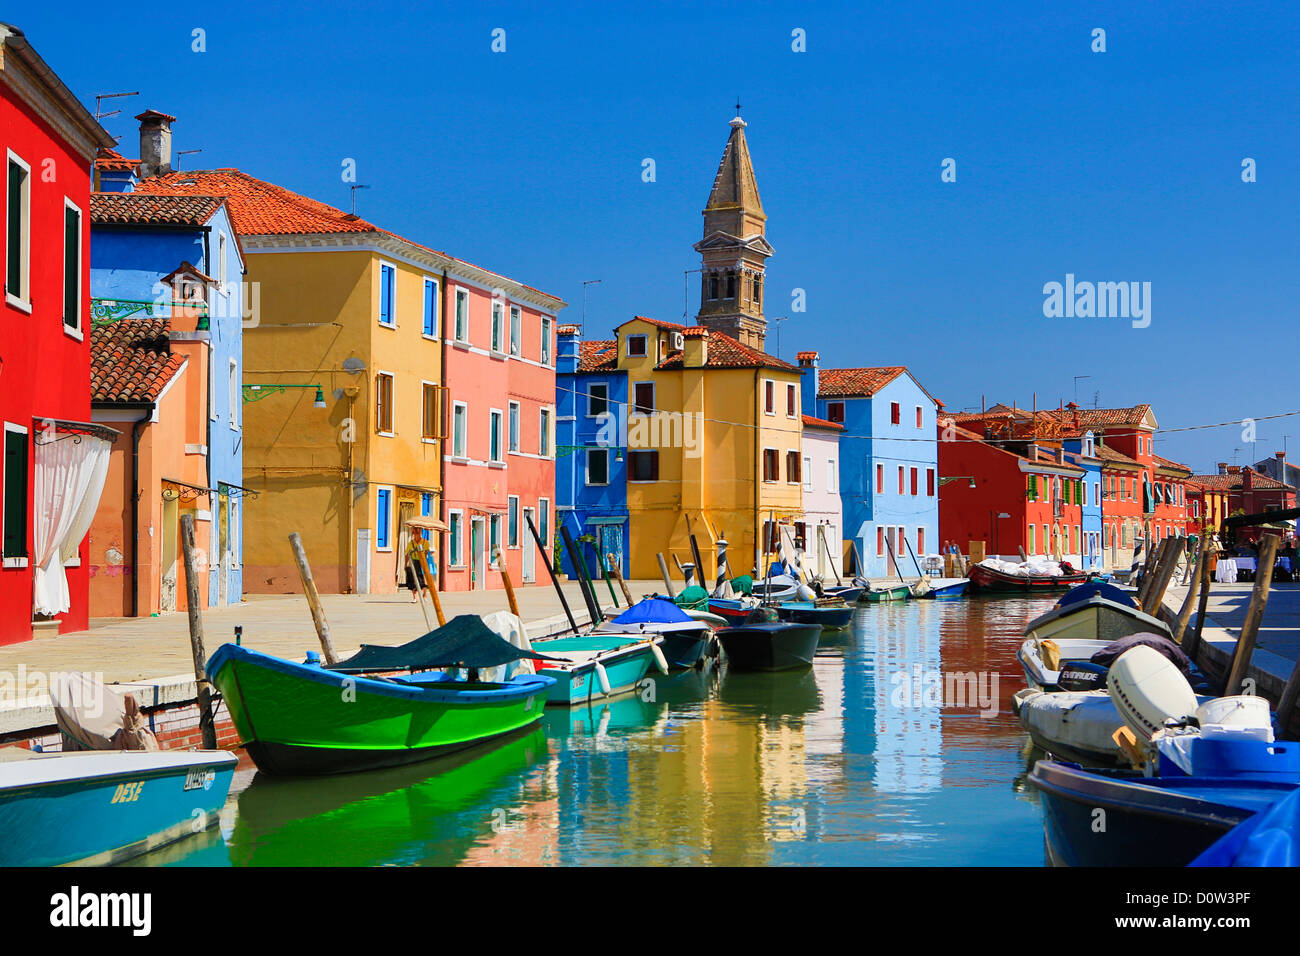 Italy, Europe, travel, Burano, architecture, boats, canal, colourful, colours, tourism, Venice Stock Photo